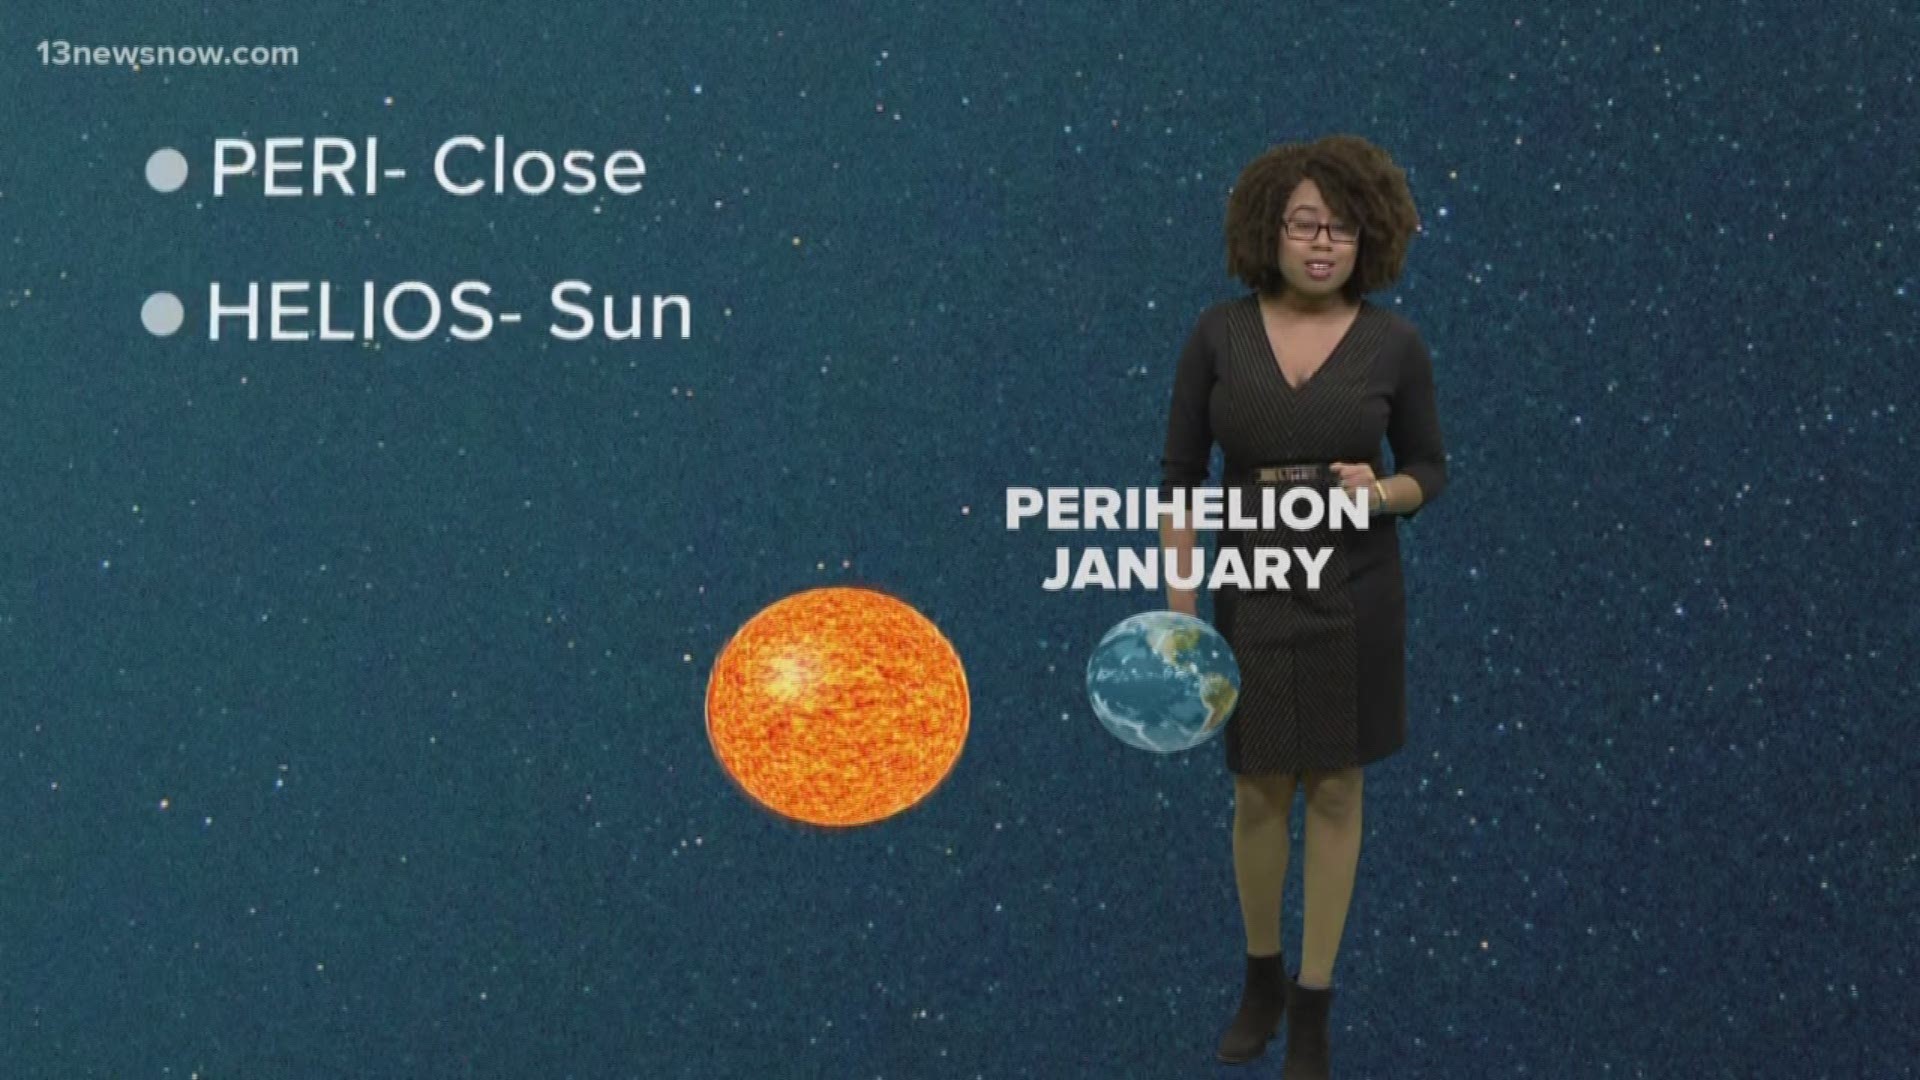 13News Now meteorologist Rachael Peart breaks down the science behind one of the coolest celestial events of the year.